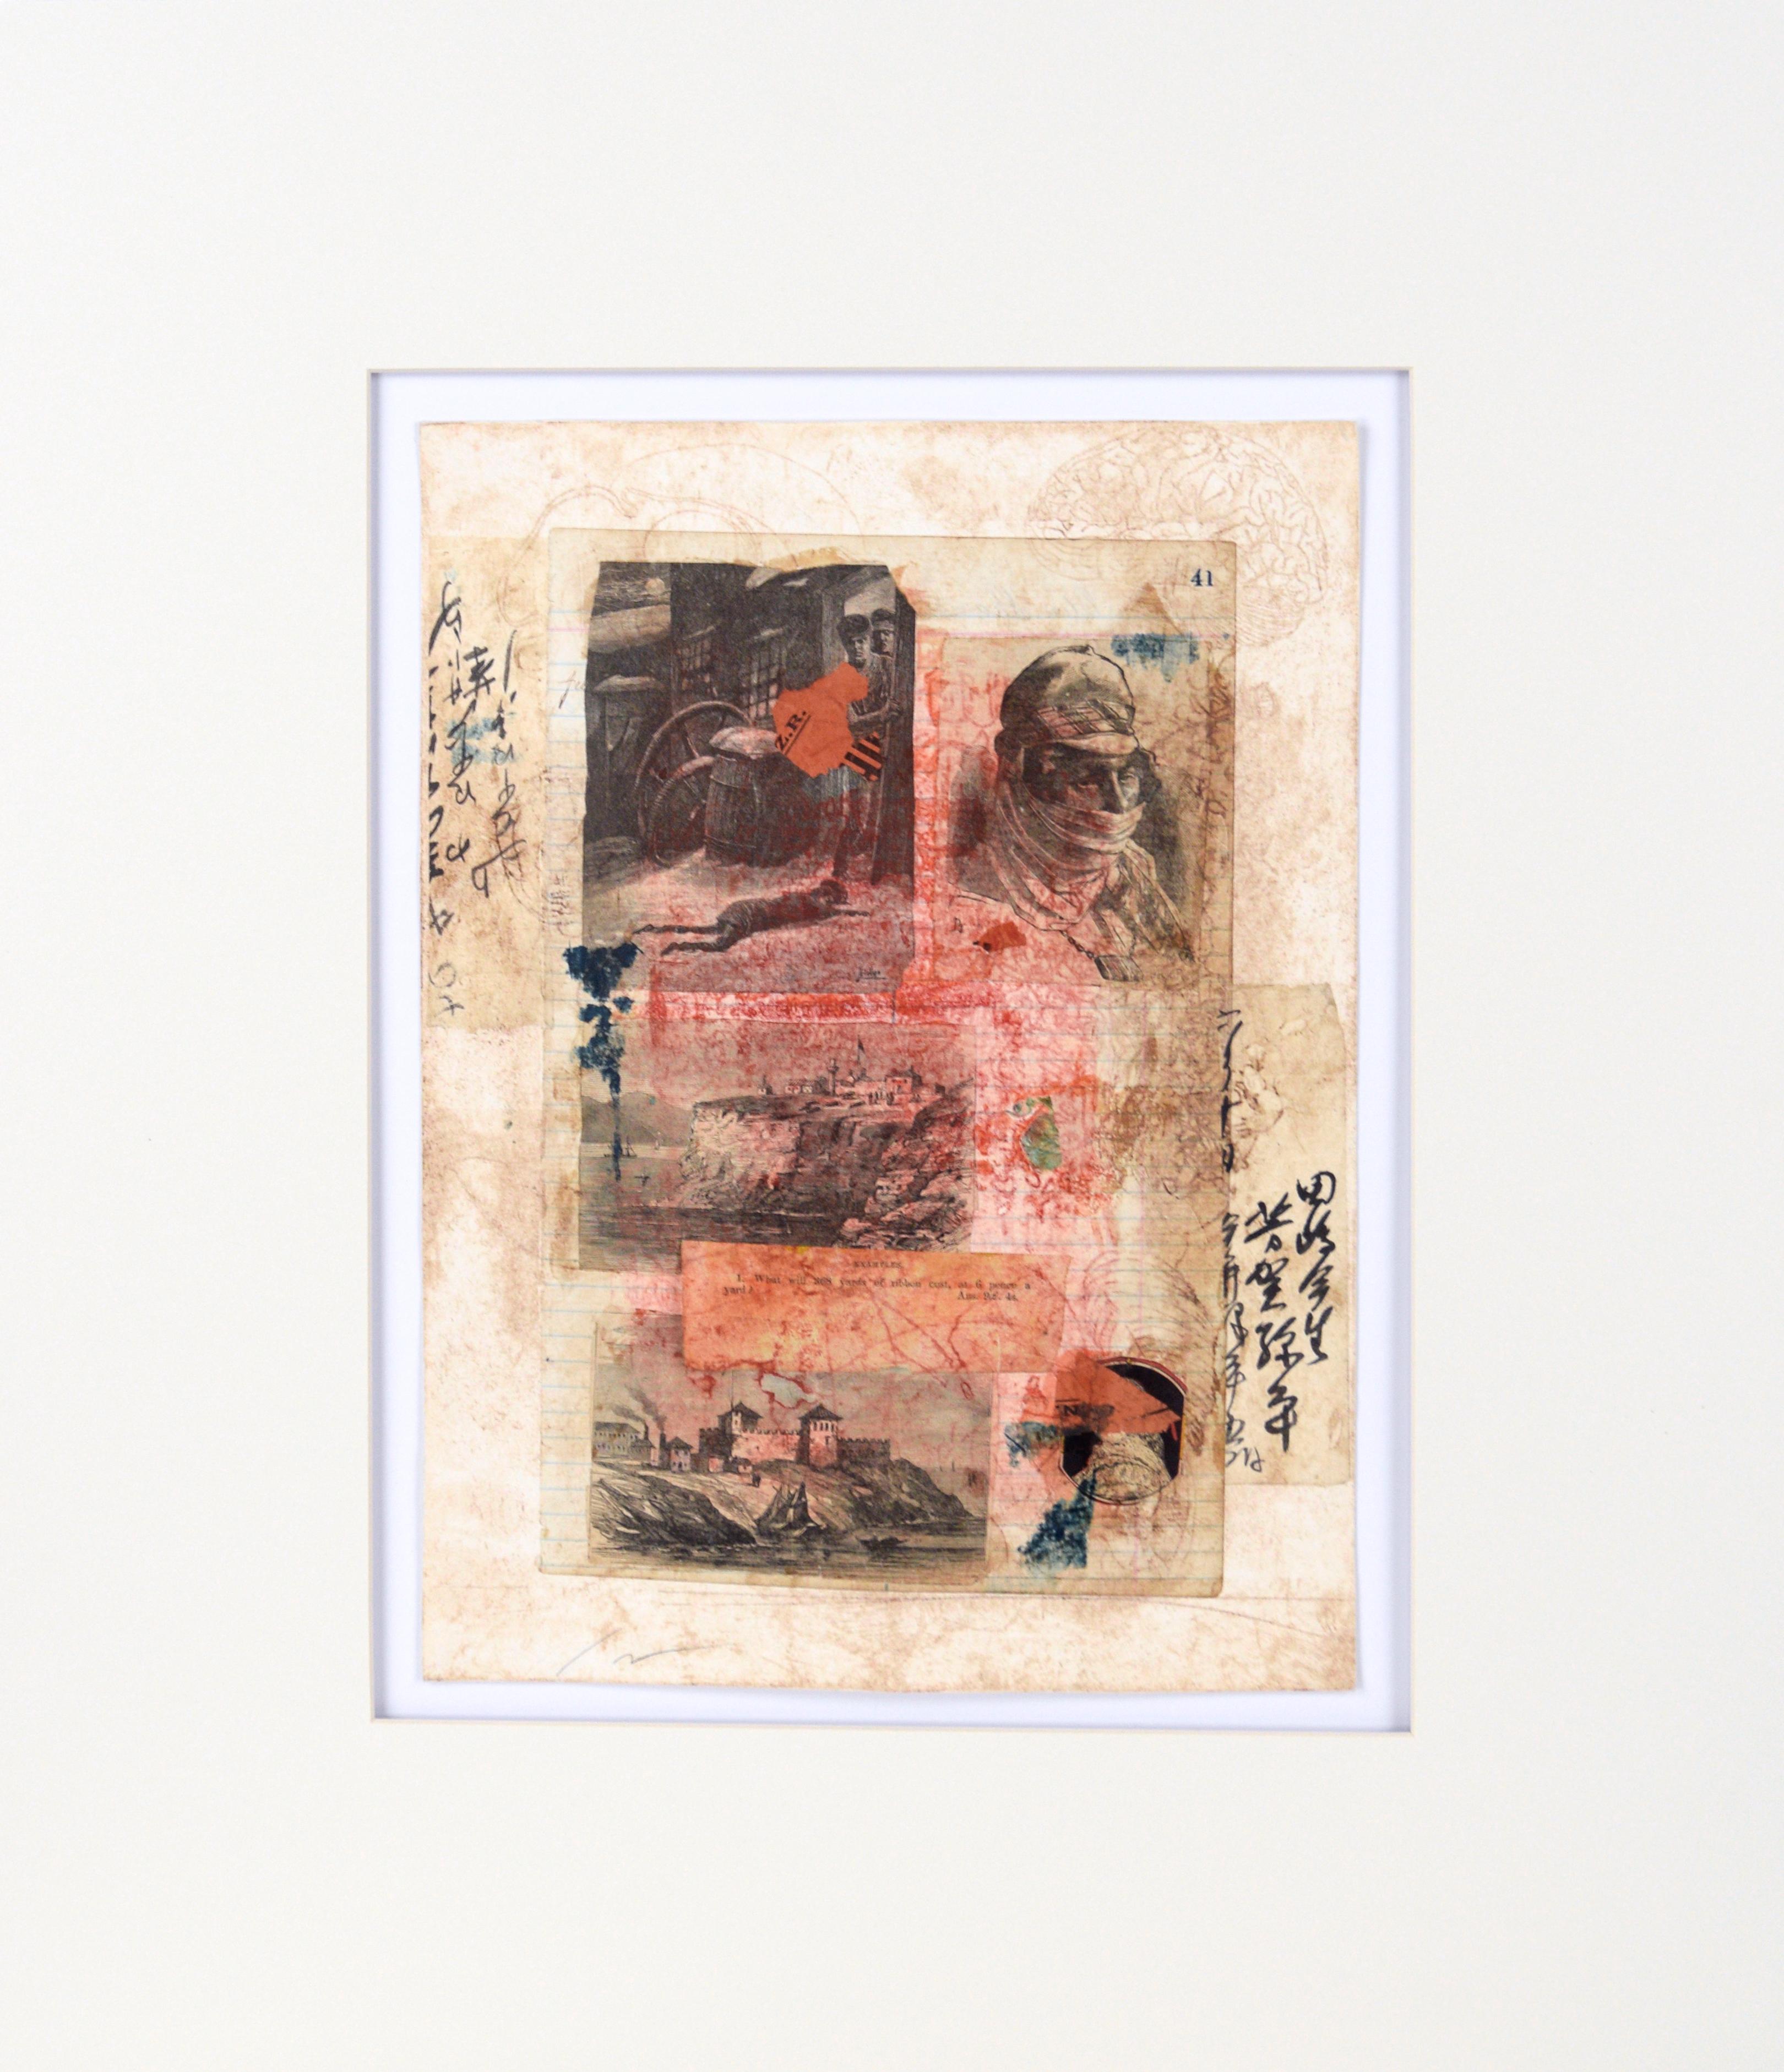 Michael Pauker  Abstract Painting - "Z.R." - Chine Colle Monoprint with Collage